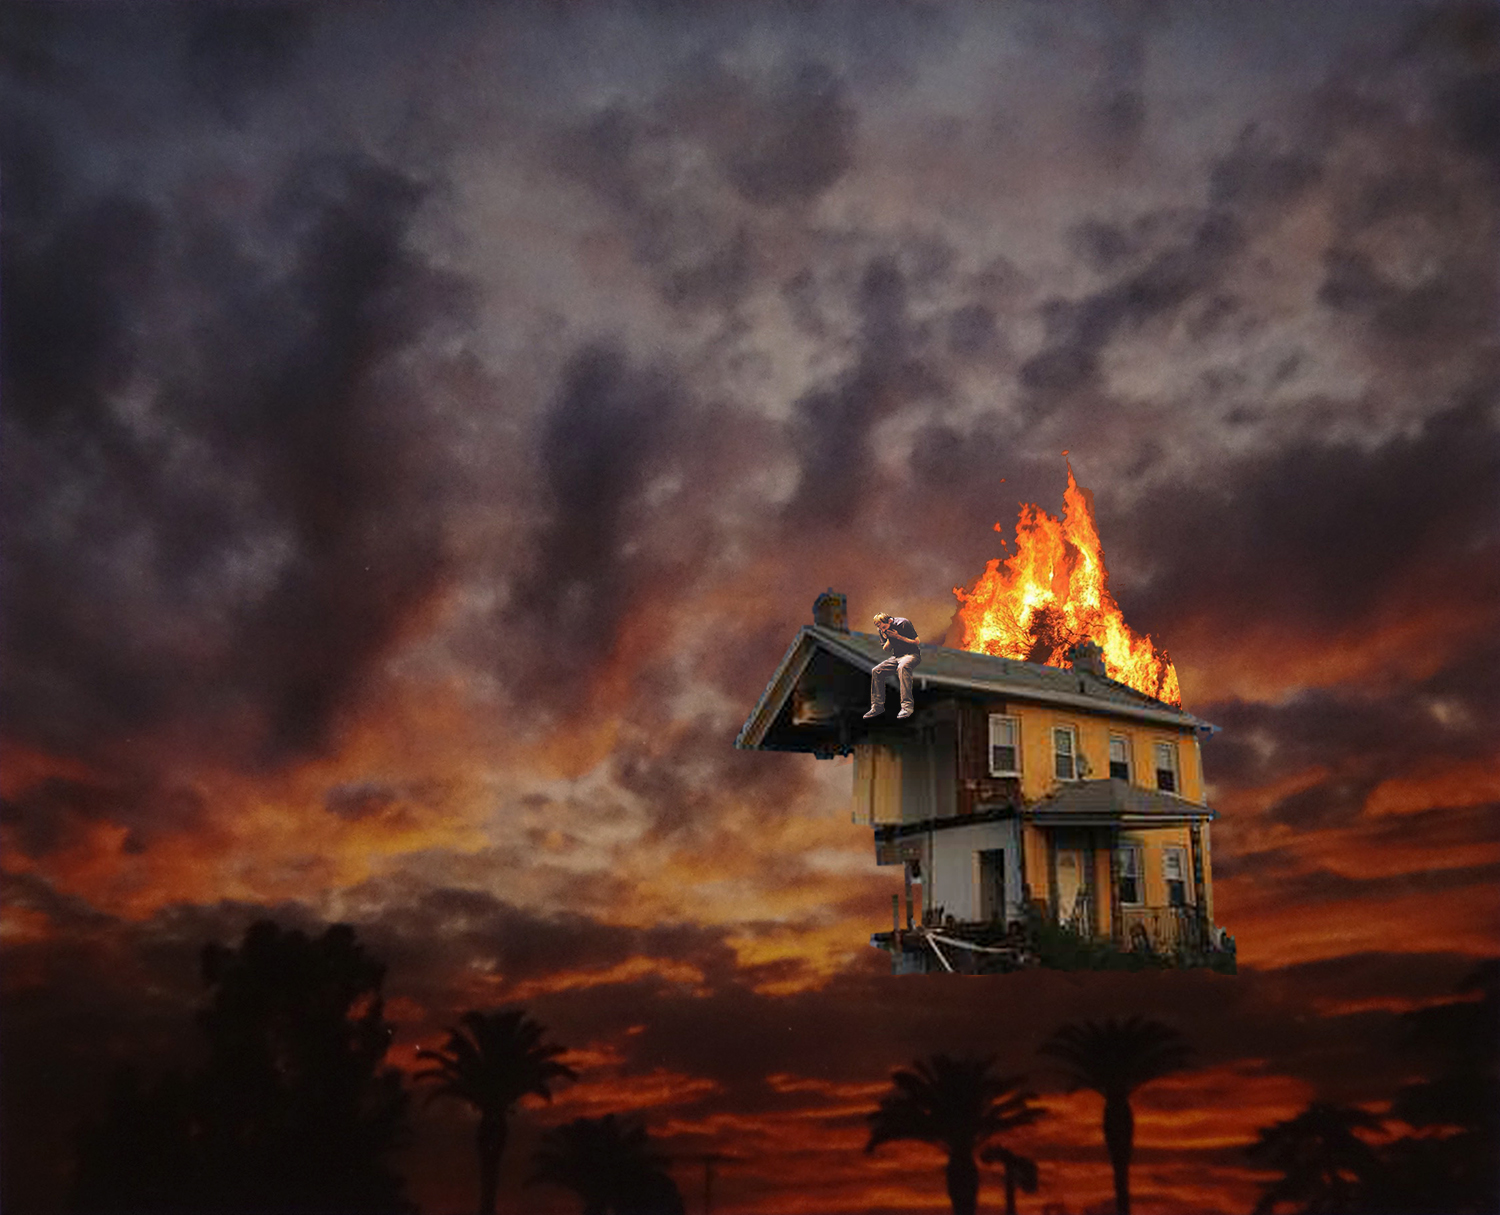 a digital painting of a house with its roof on fire in the foreground, a fiery red night sky in the background, representing climate change